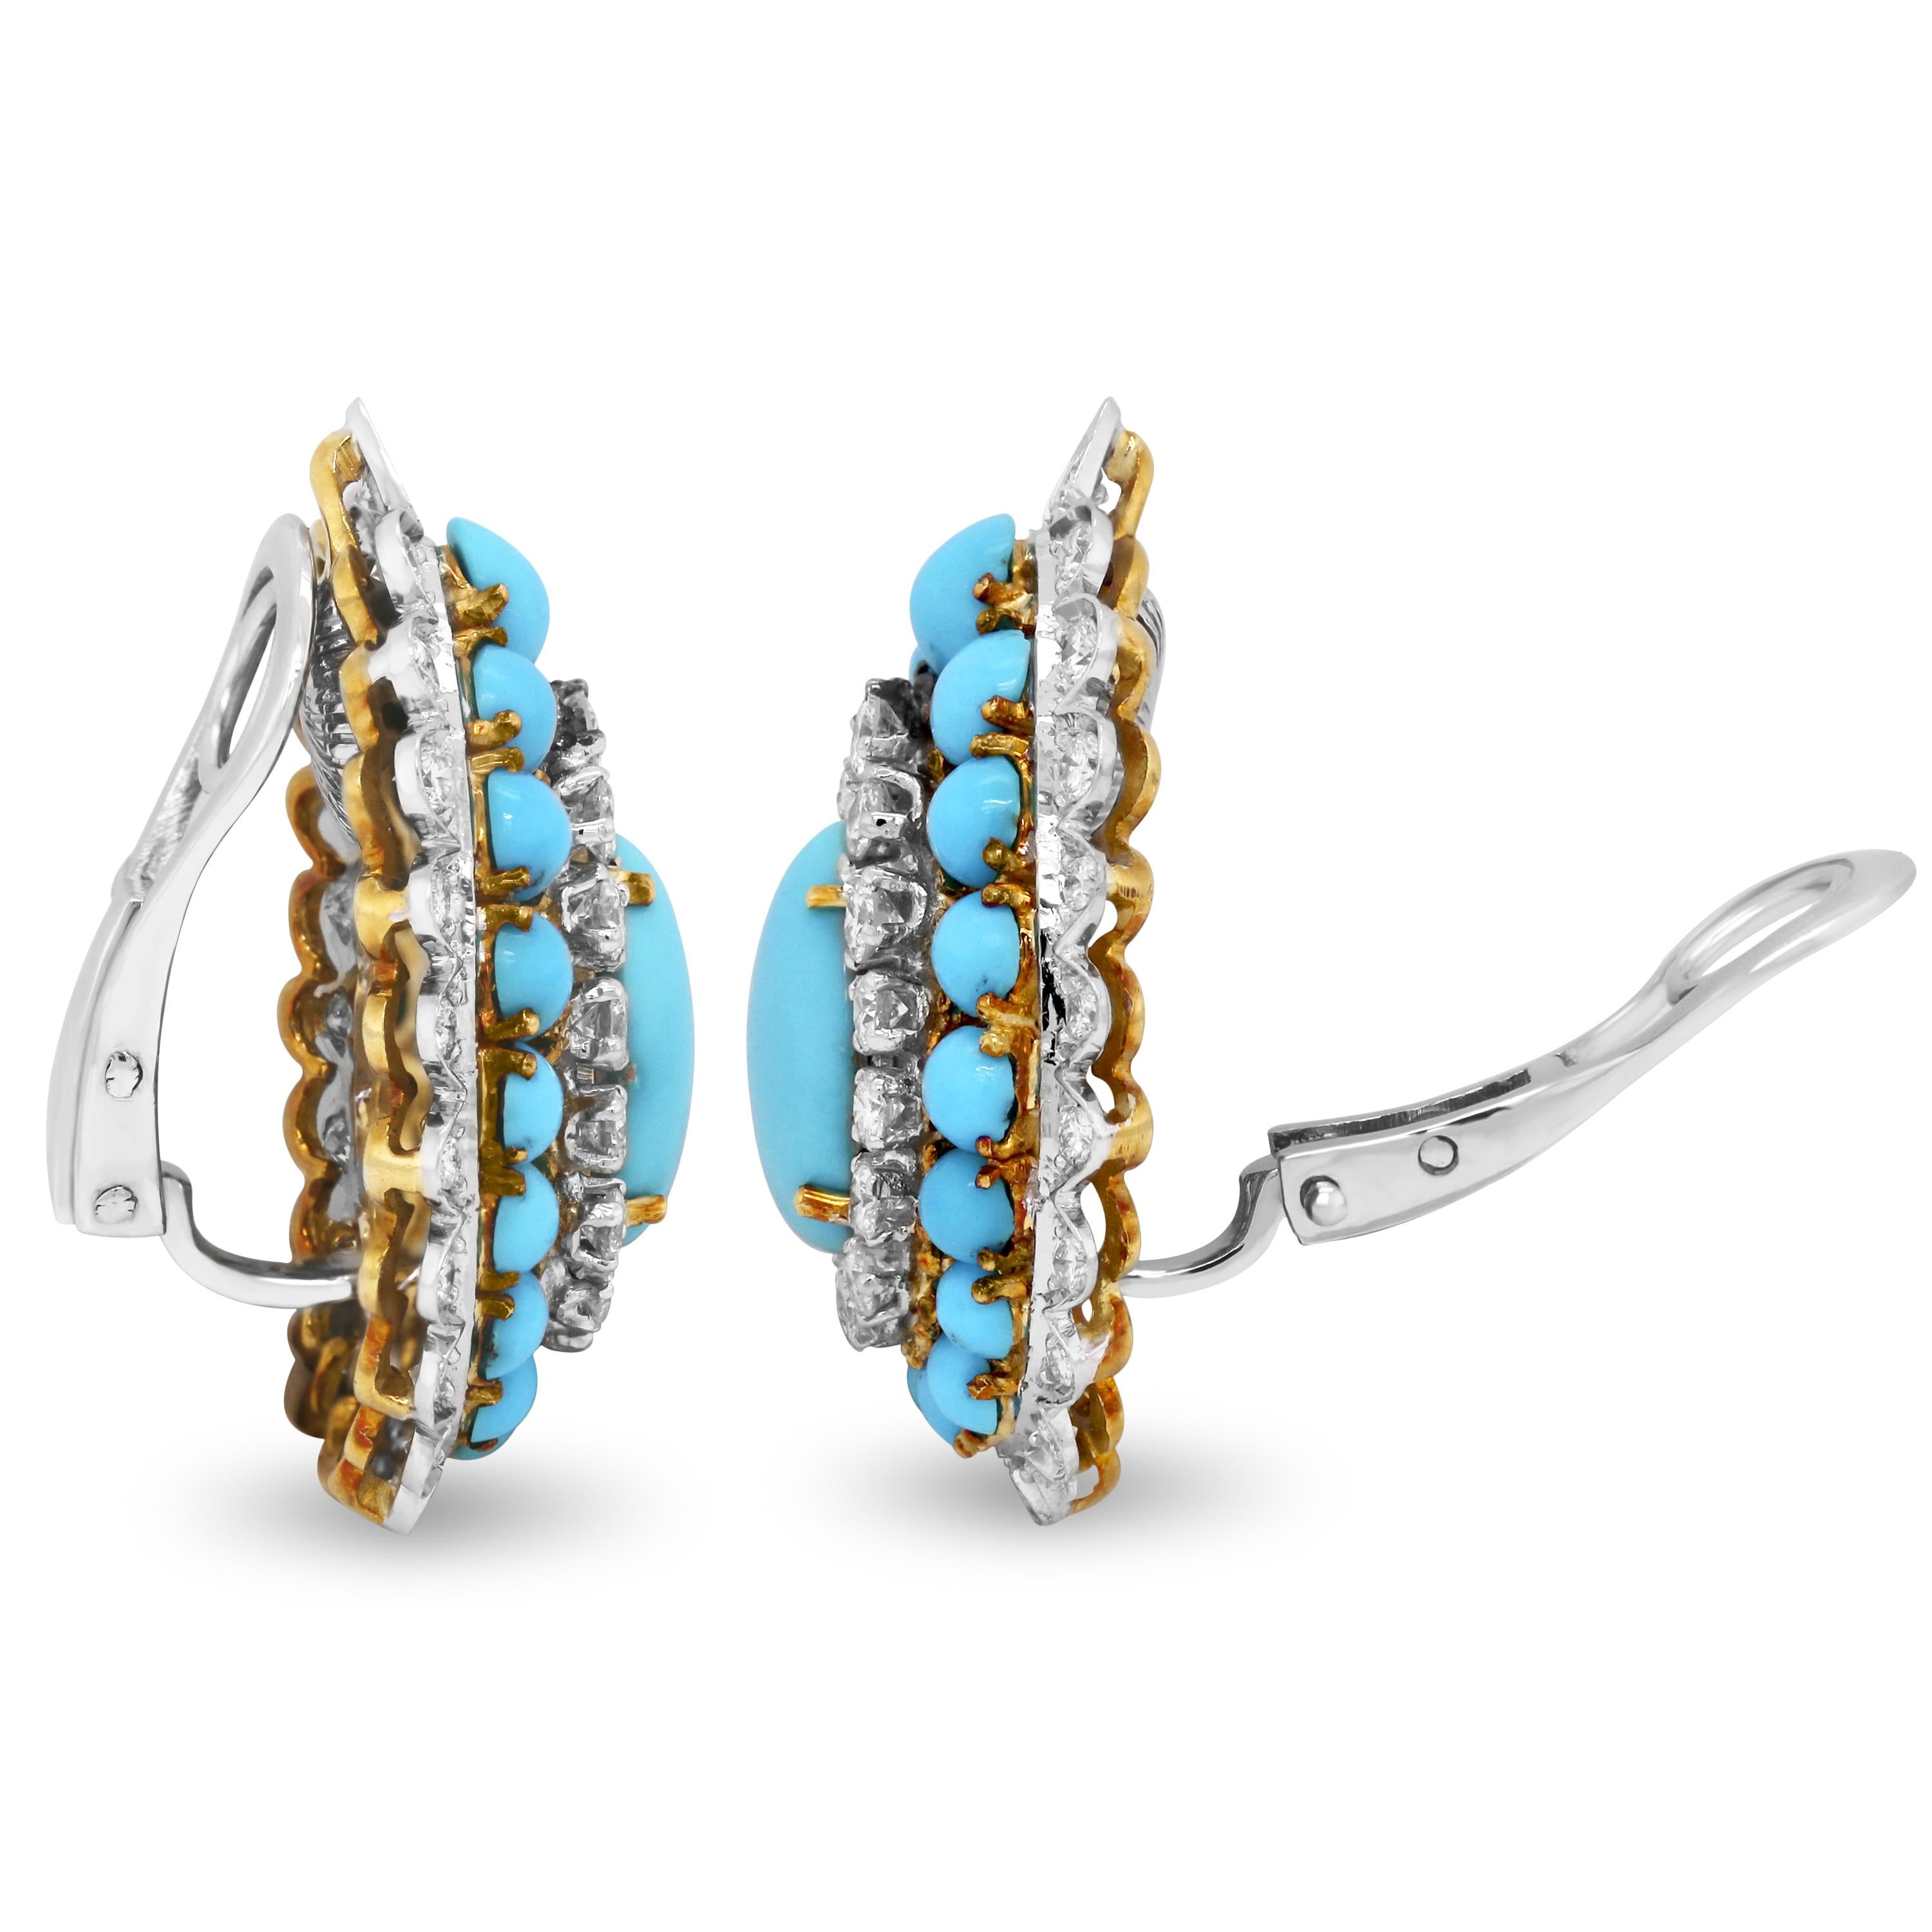 18 Karat Two Tone Yellow White Gold Diamond Sleeping Beauty Turquoise Earrings

These one-of-a-kind earrings feature some of the most high-quality turquoise we have ever seen. The centers have one pear shape turquoise each with a row of rounds along